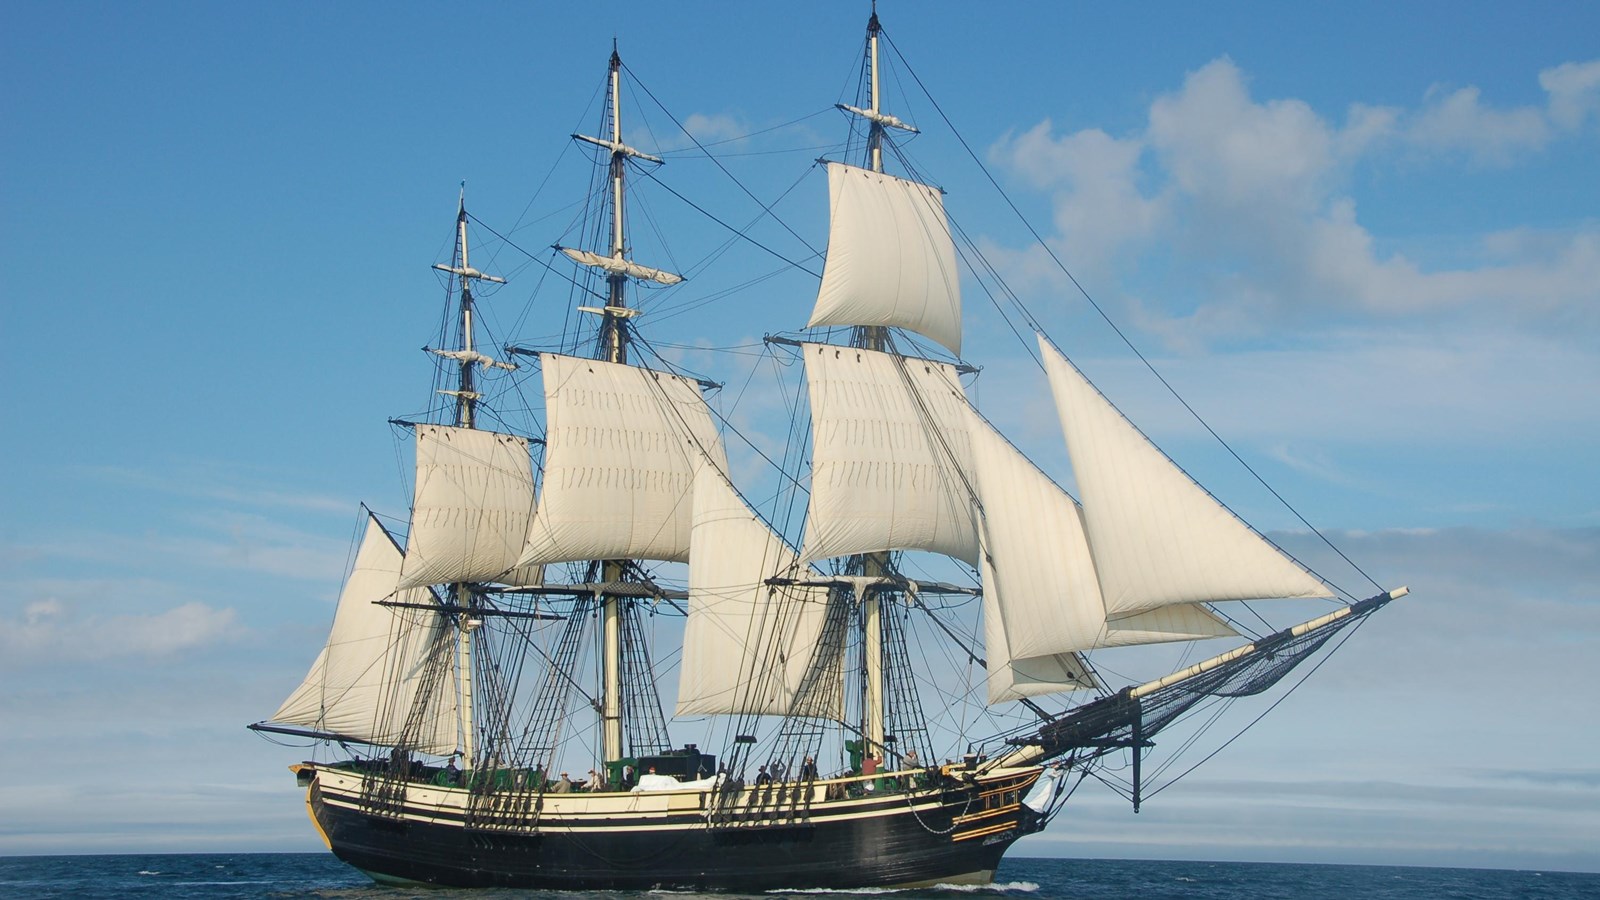 A two-decked, three-masted merchant ship sailing the seas on a sunny day